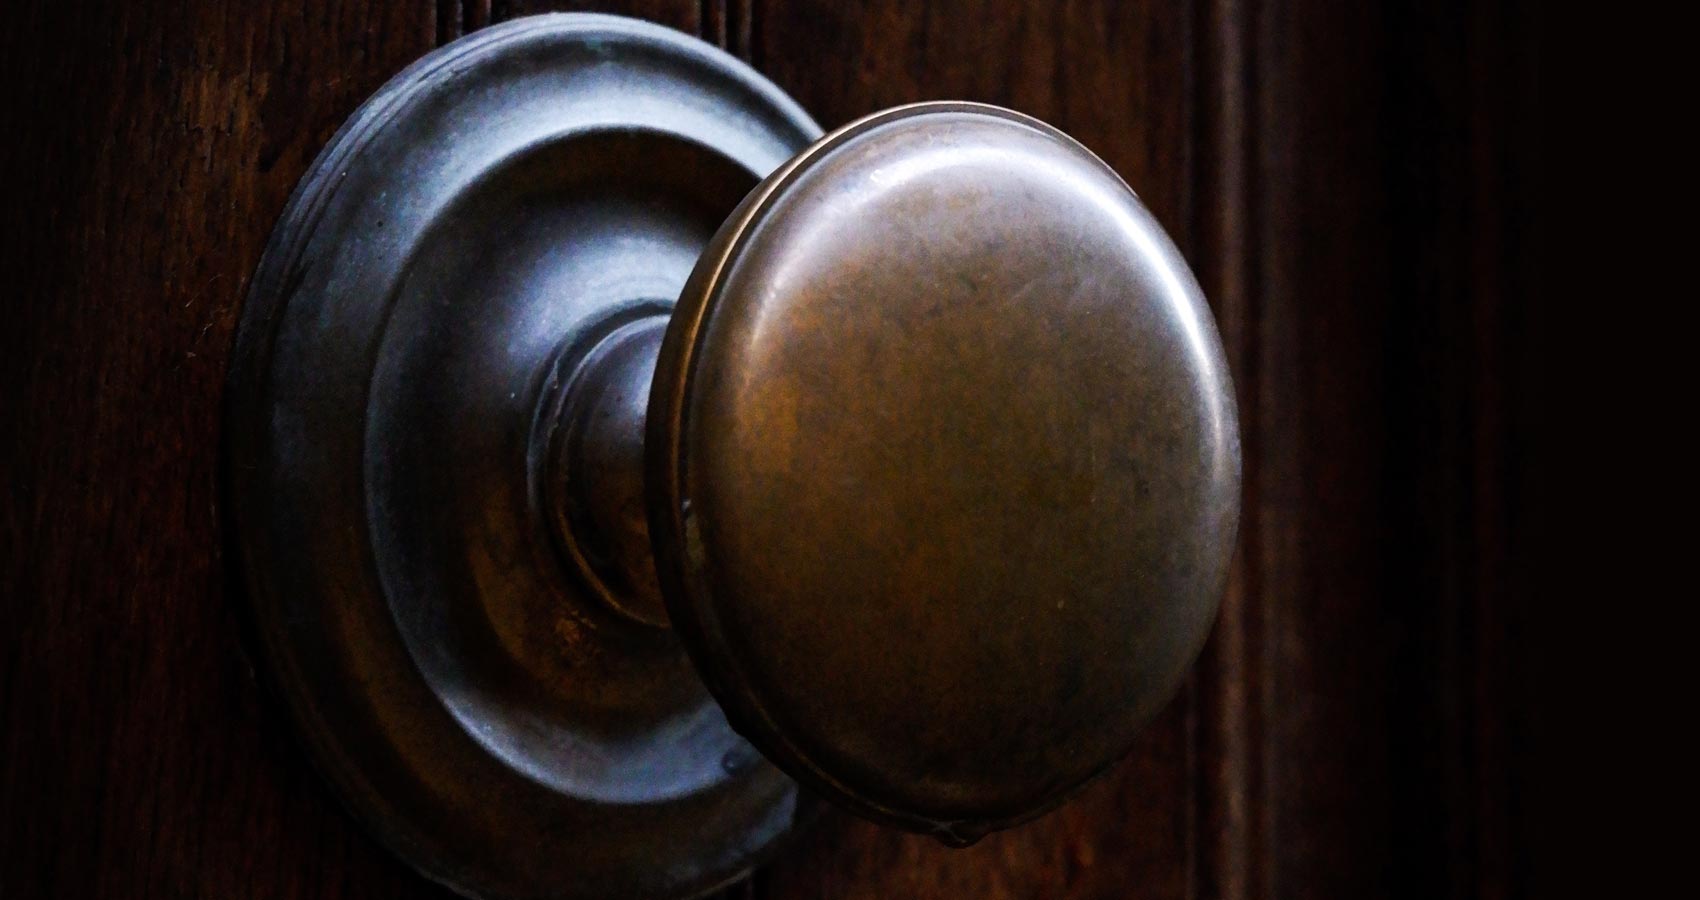 The Doorknob, flash fiction by Phyllis Souza at Spillwords.com